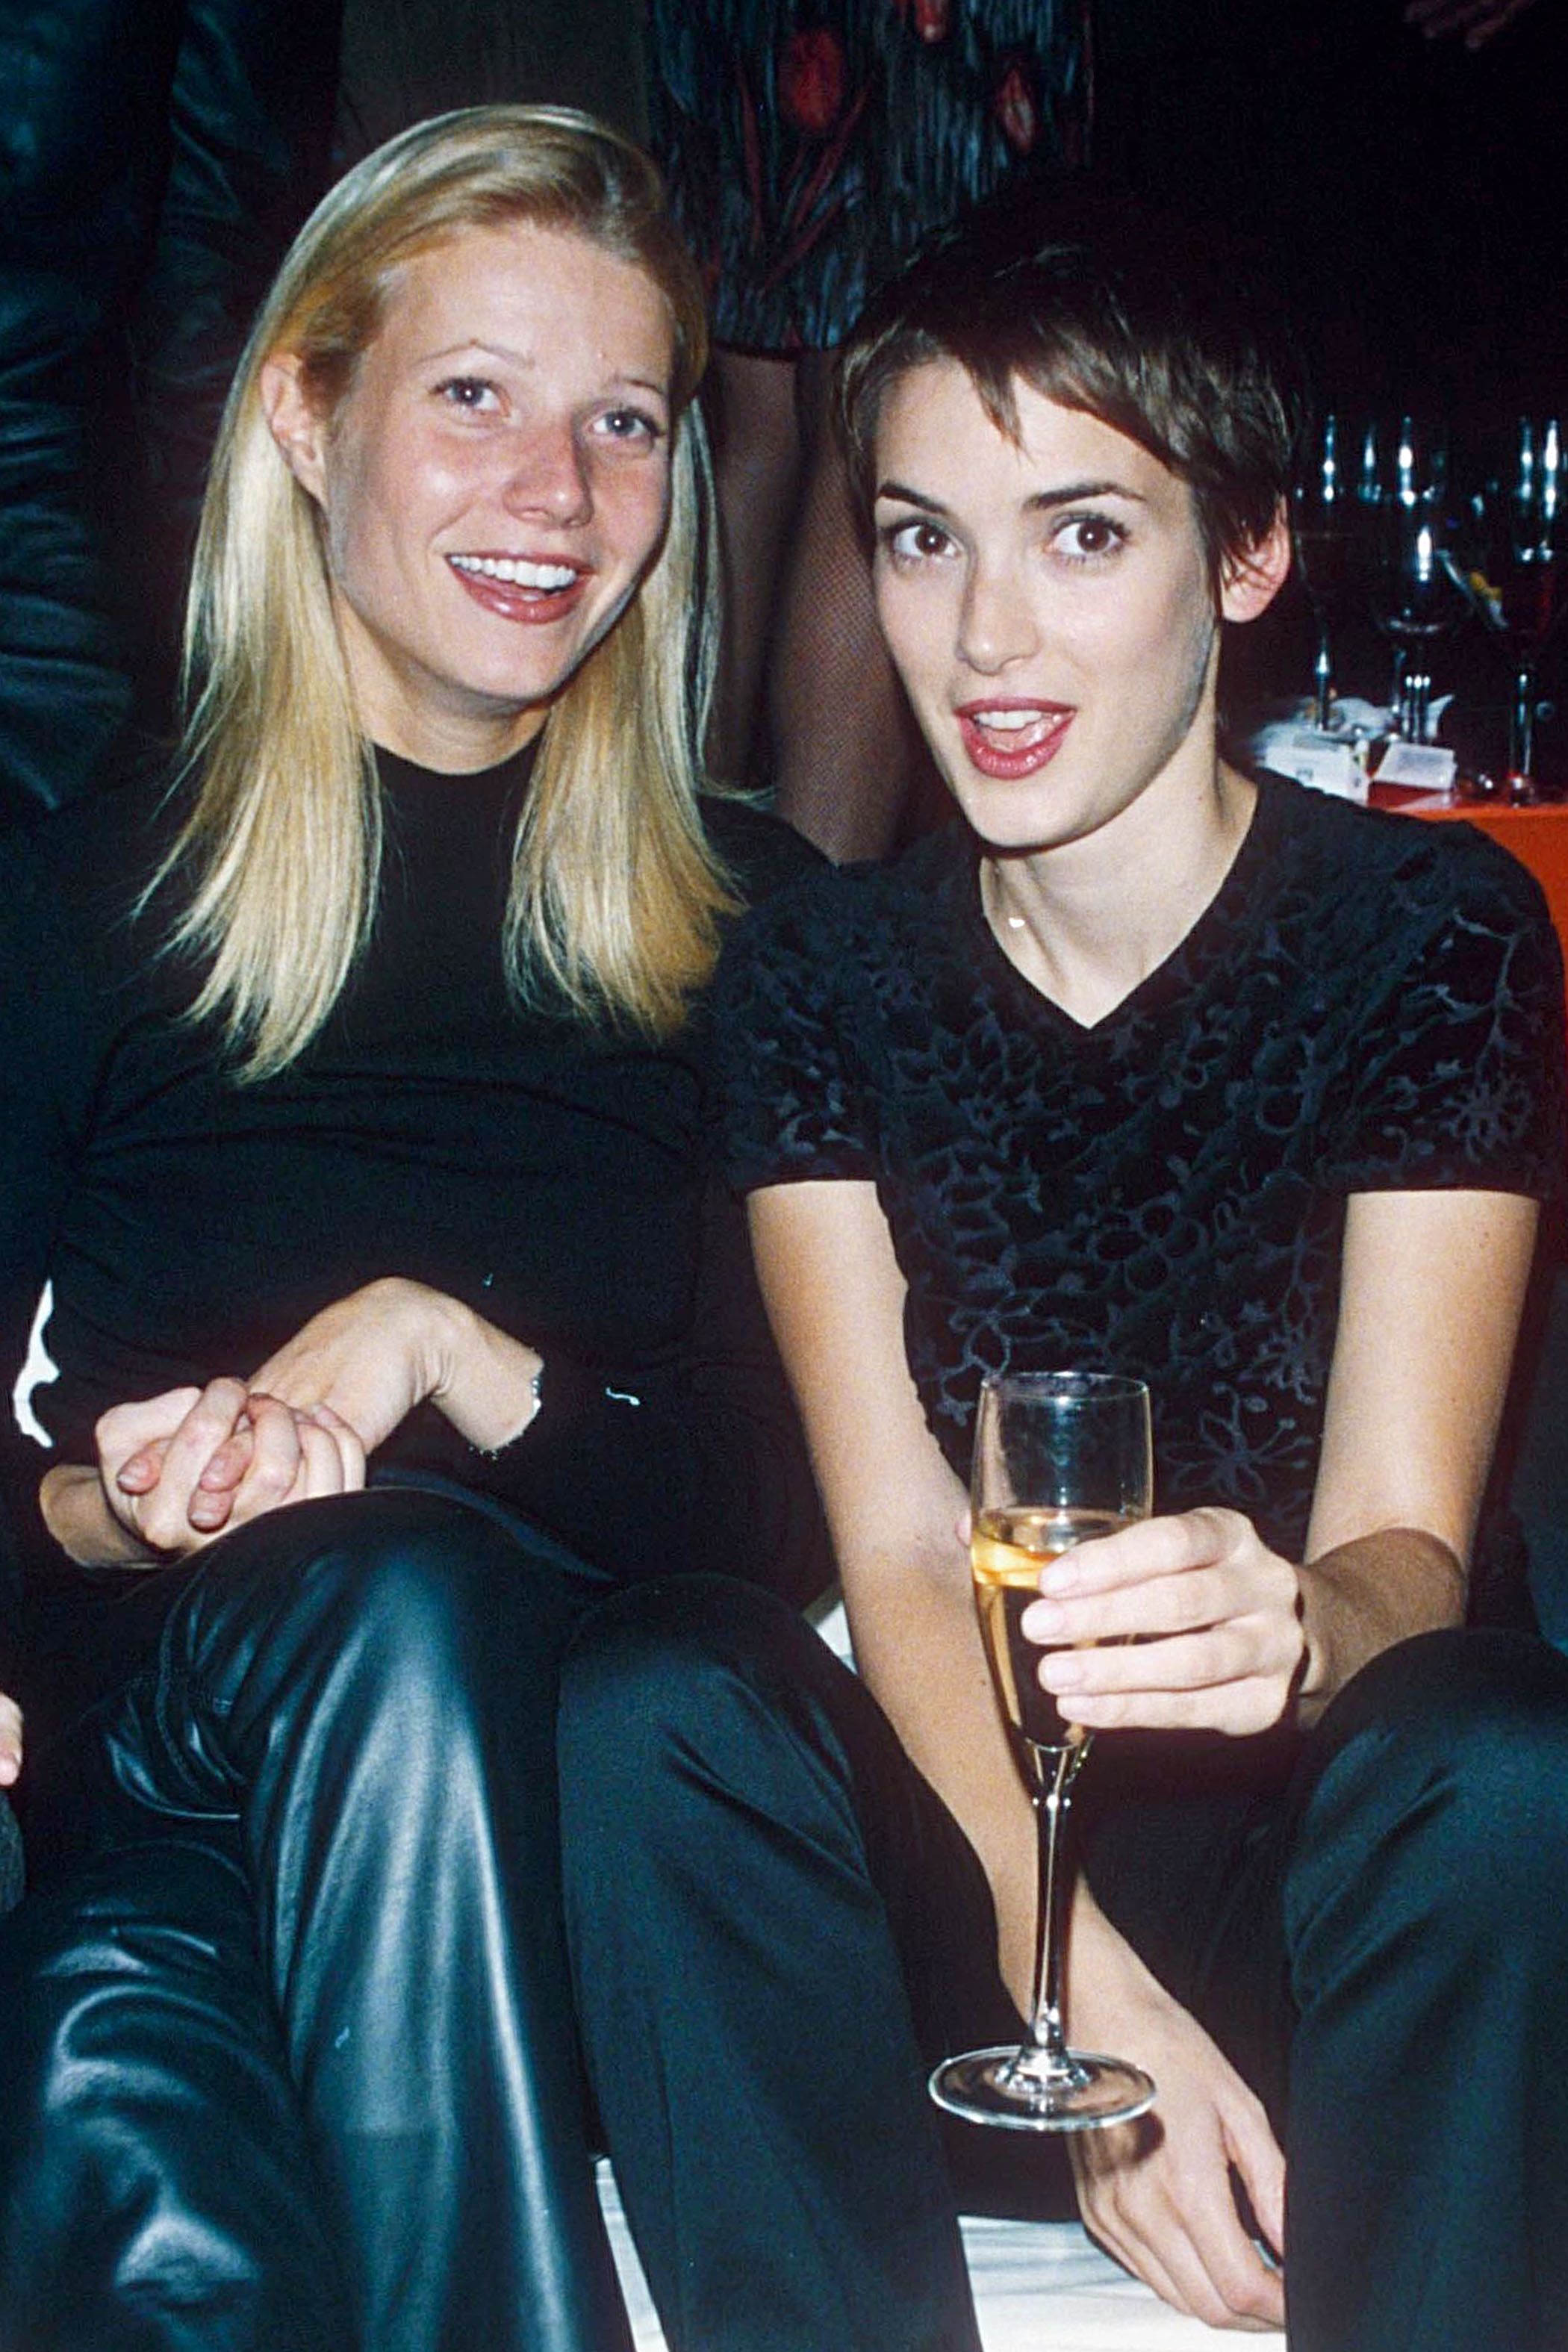 Gwyneth Paltrow and Winona Ryder during Giorgio Armani Party in 1995